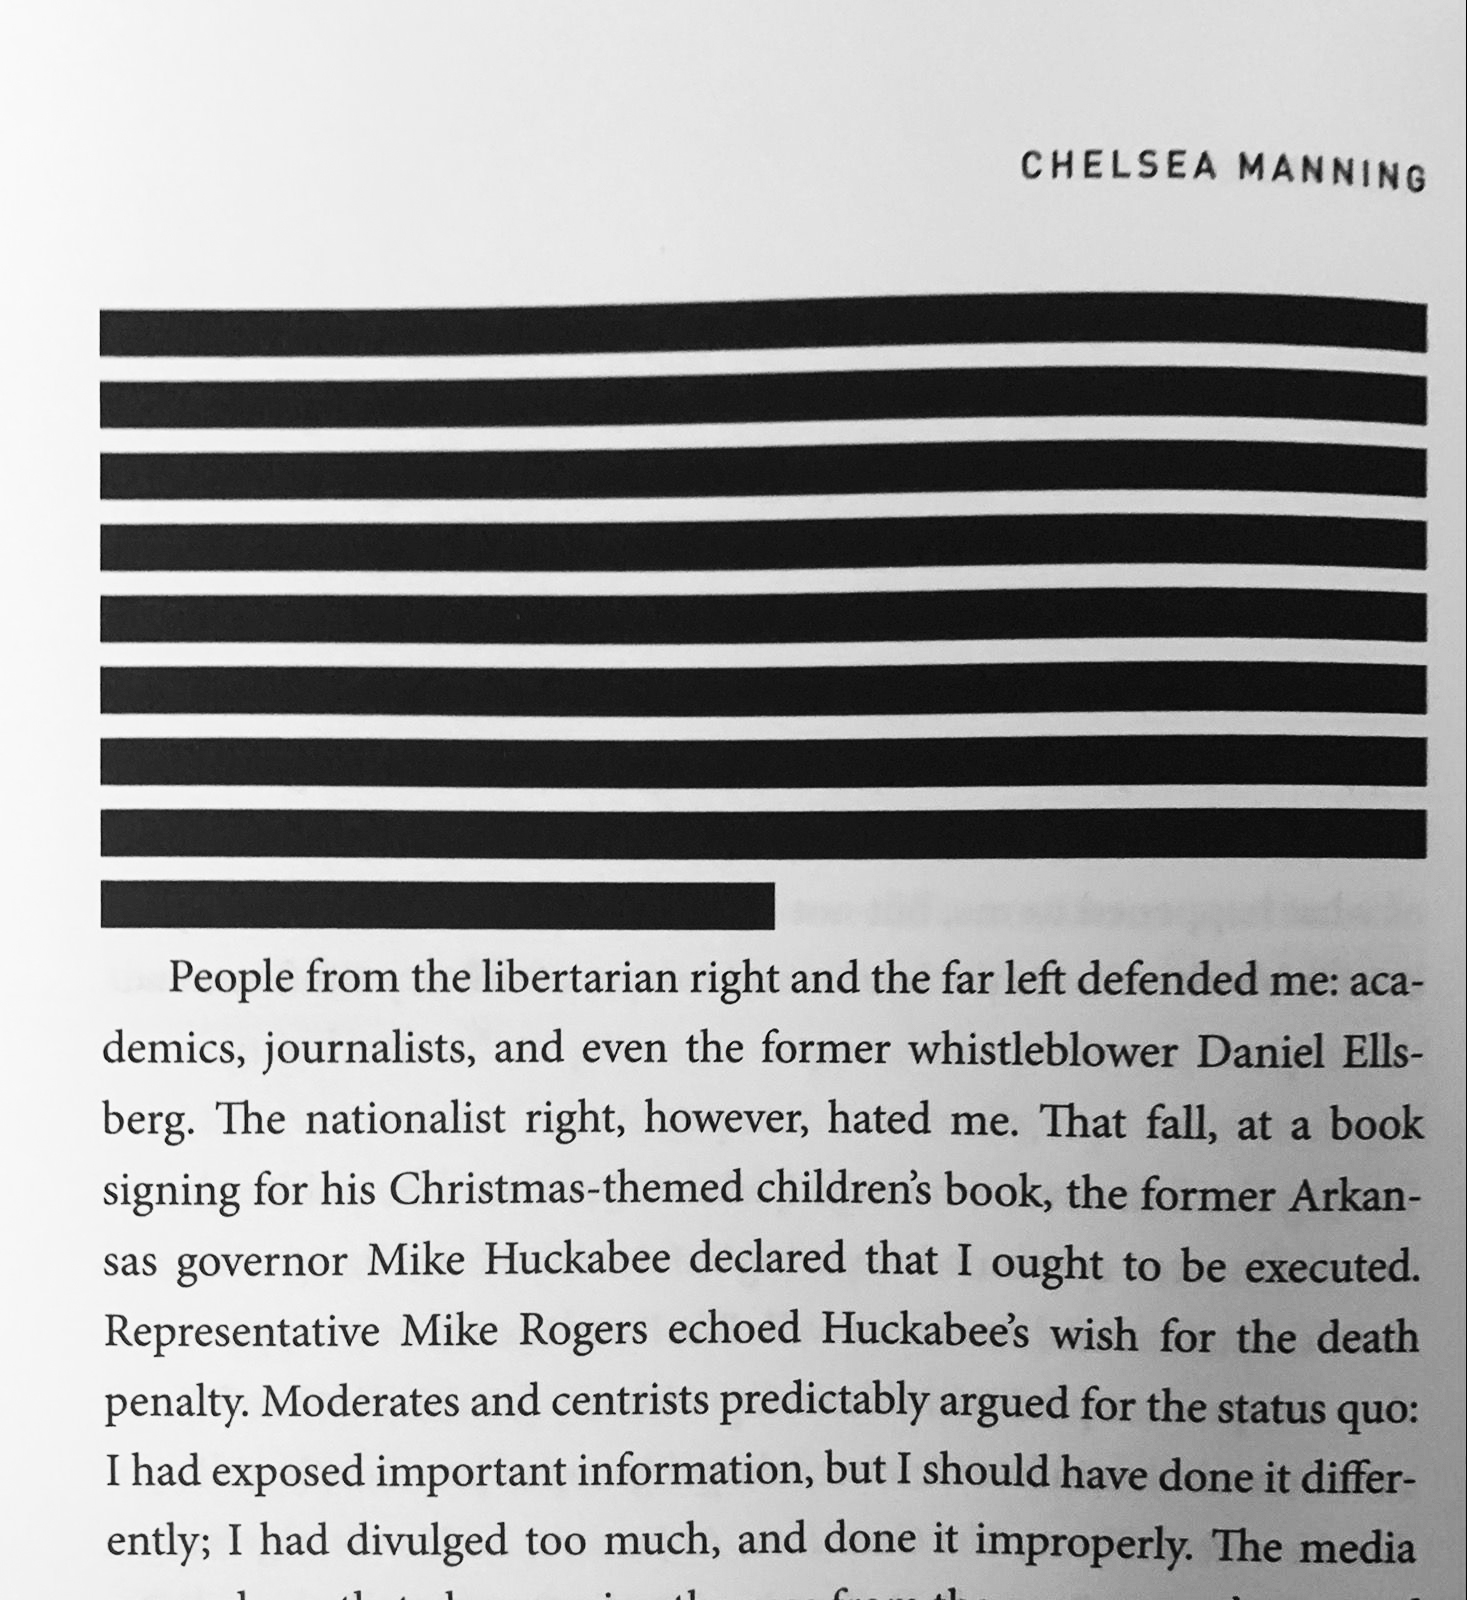 Readme.txt by Chelsea Manning redacted passage.